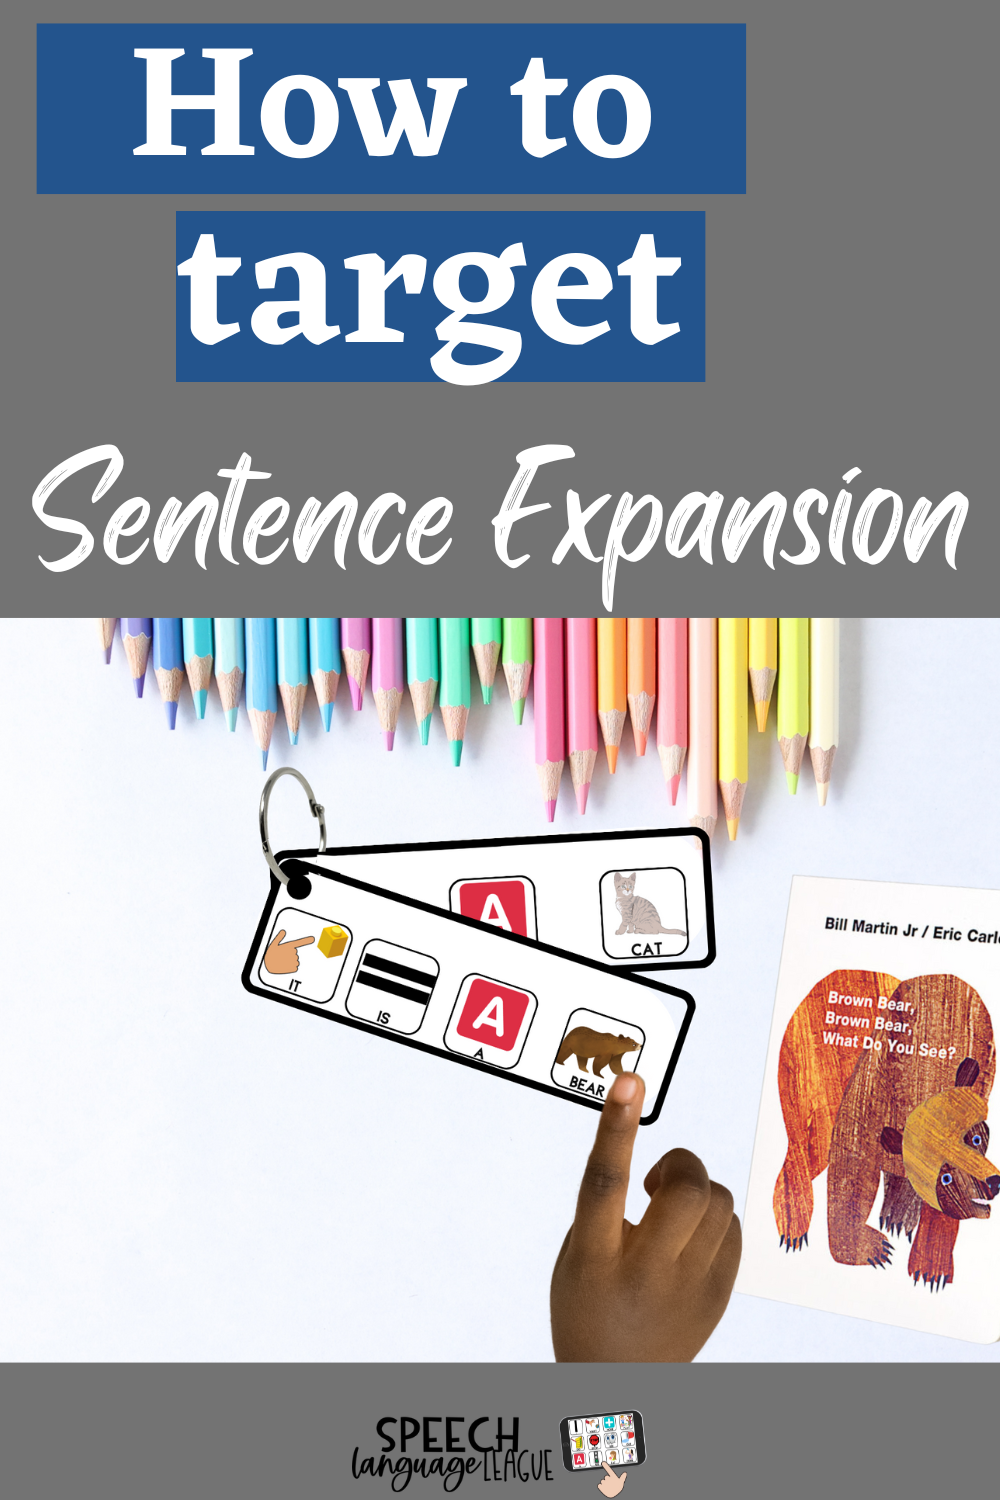 How to Target Sentence Expansion